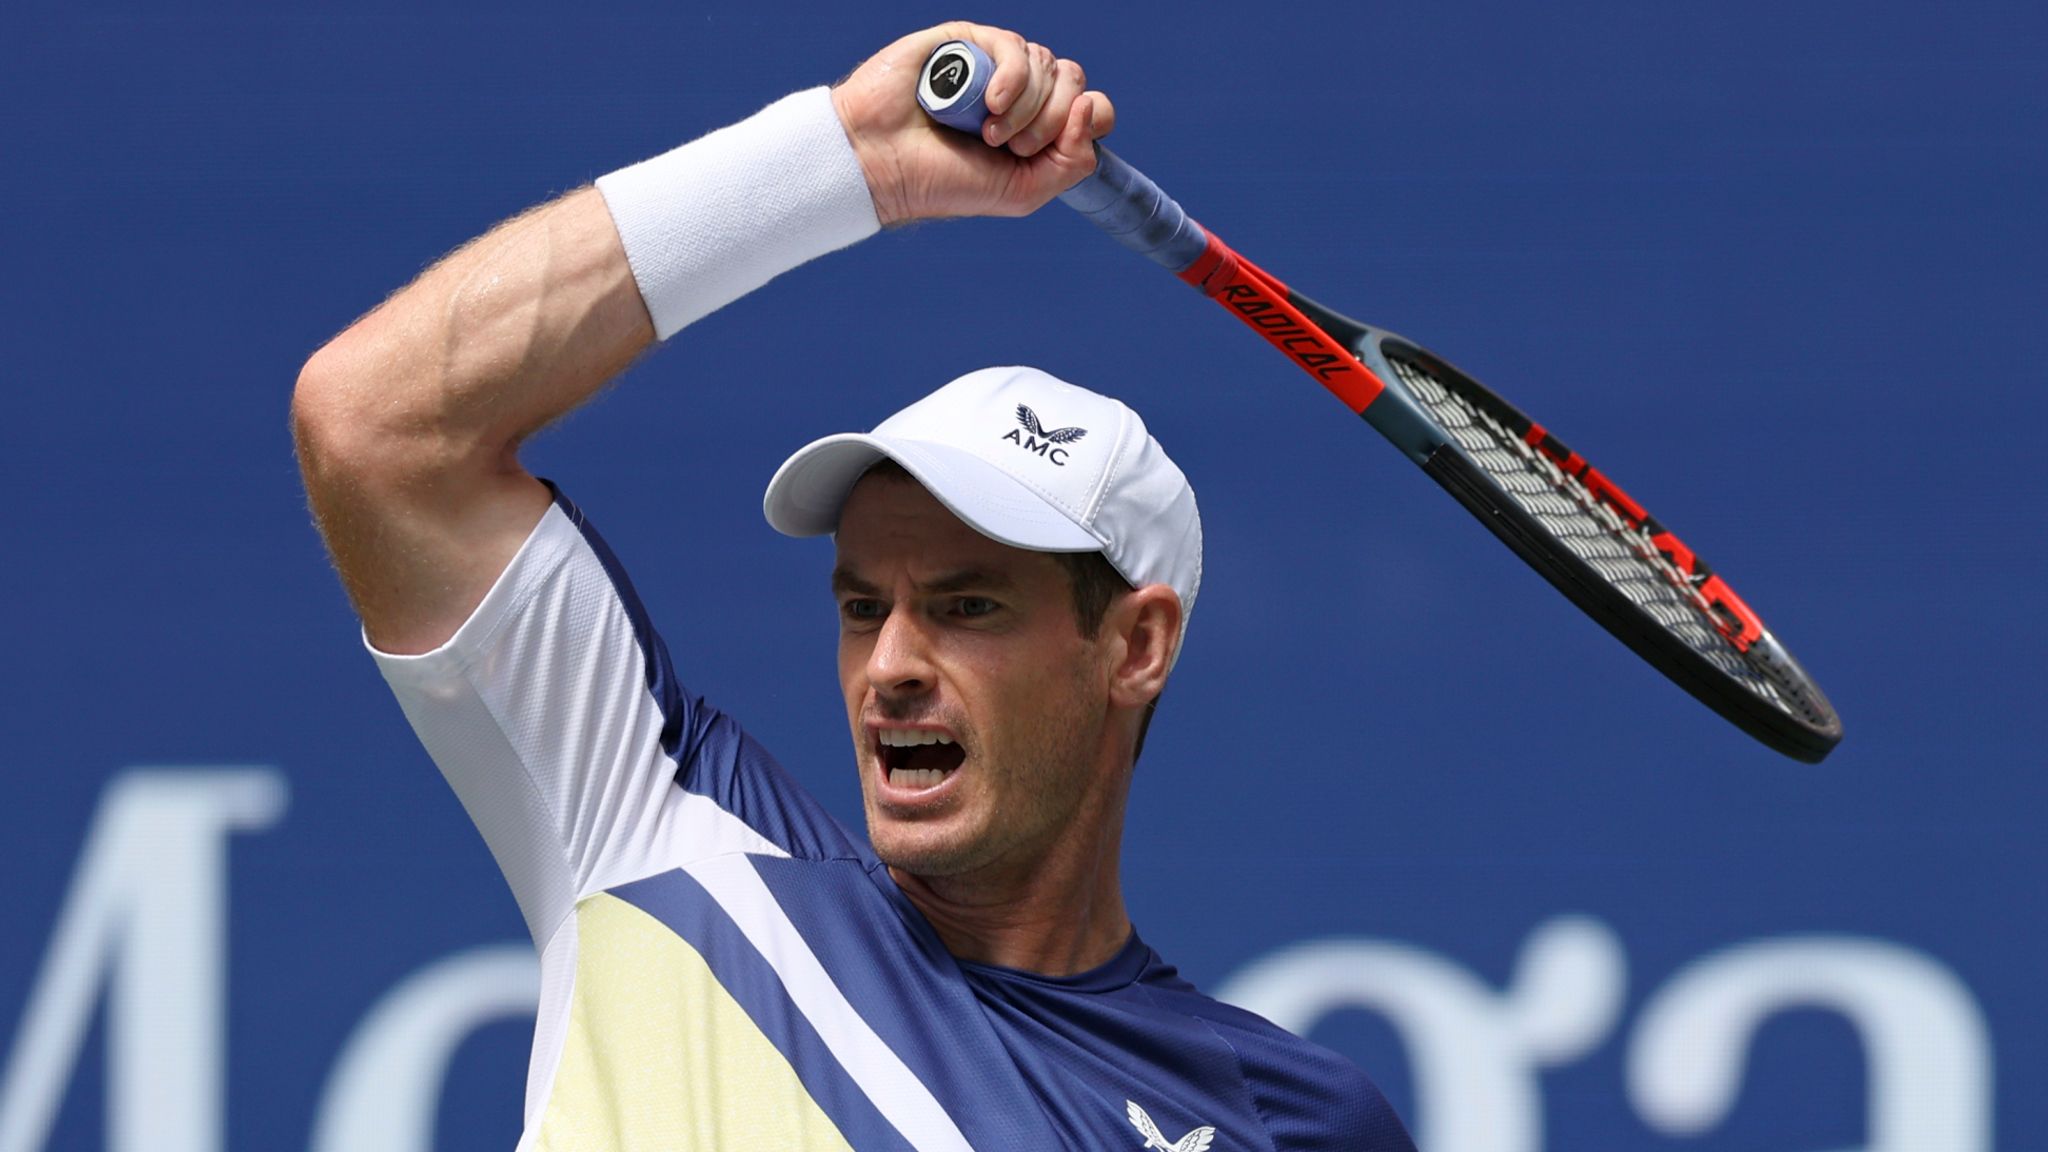 US Open Andy Murray advances into third round after victory over American Emilio Nava Tennis News Sky Sports